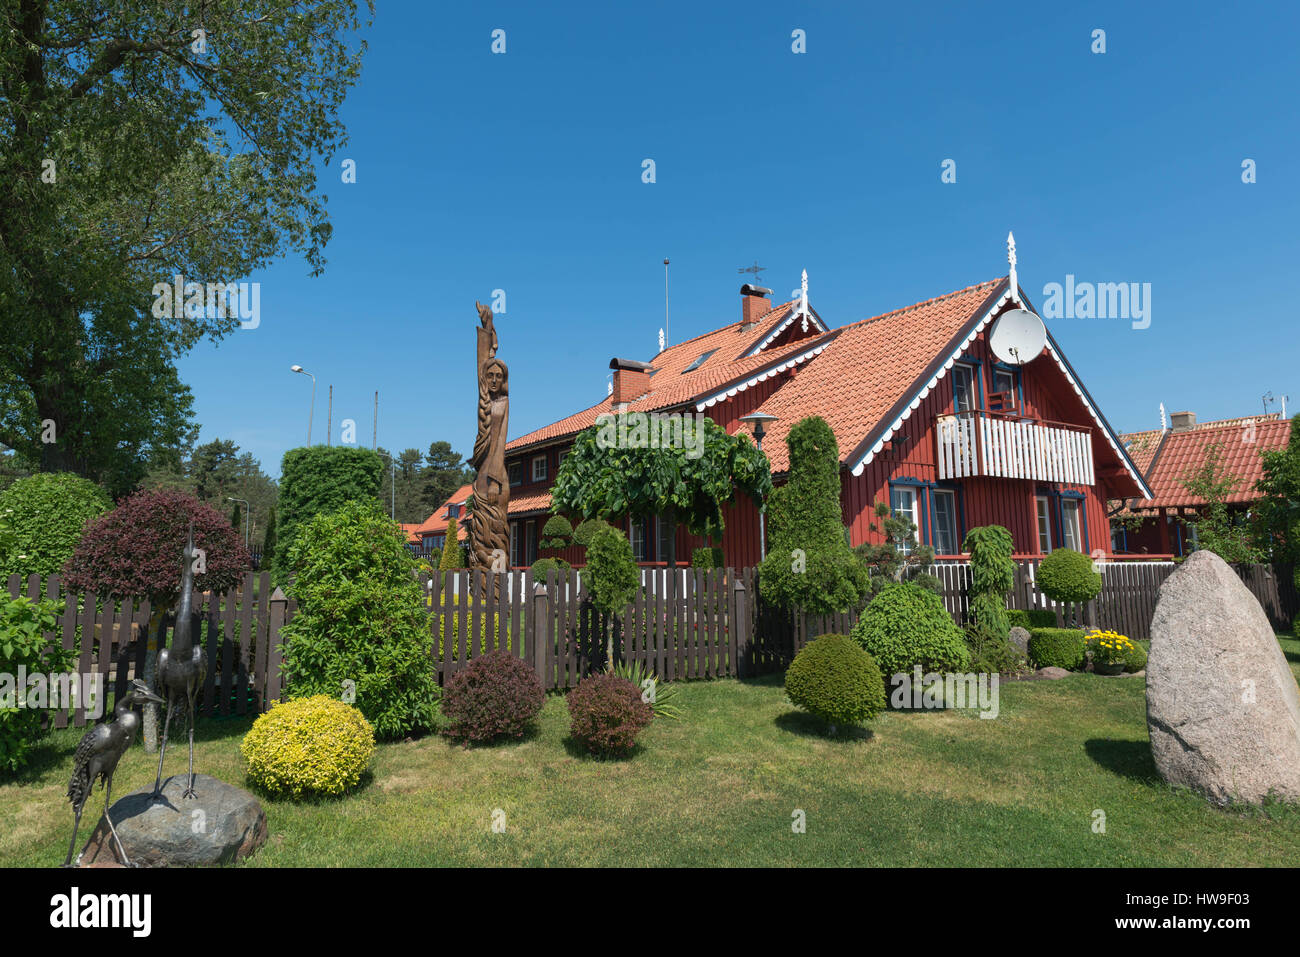 House typical of the Curonian region in Nida, Coronian Spit, UNESCO World Heritage, Lithuania, Eastern Europe Stock Photo